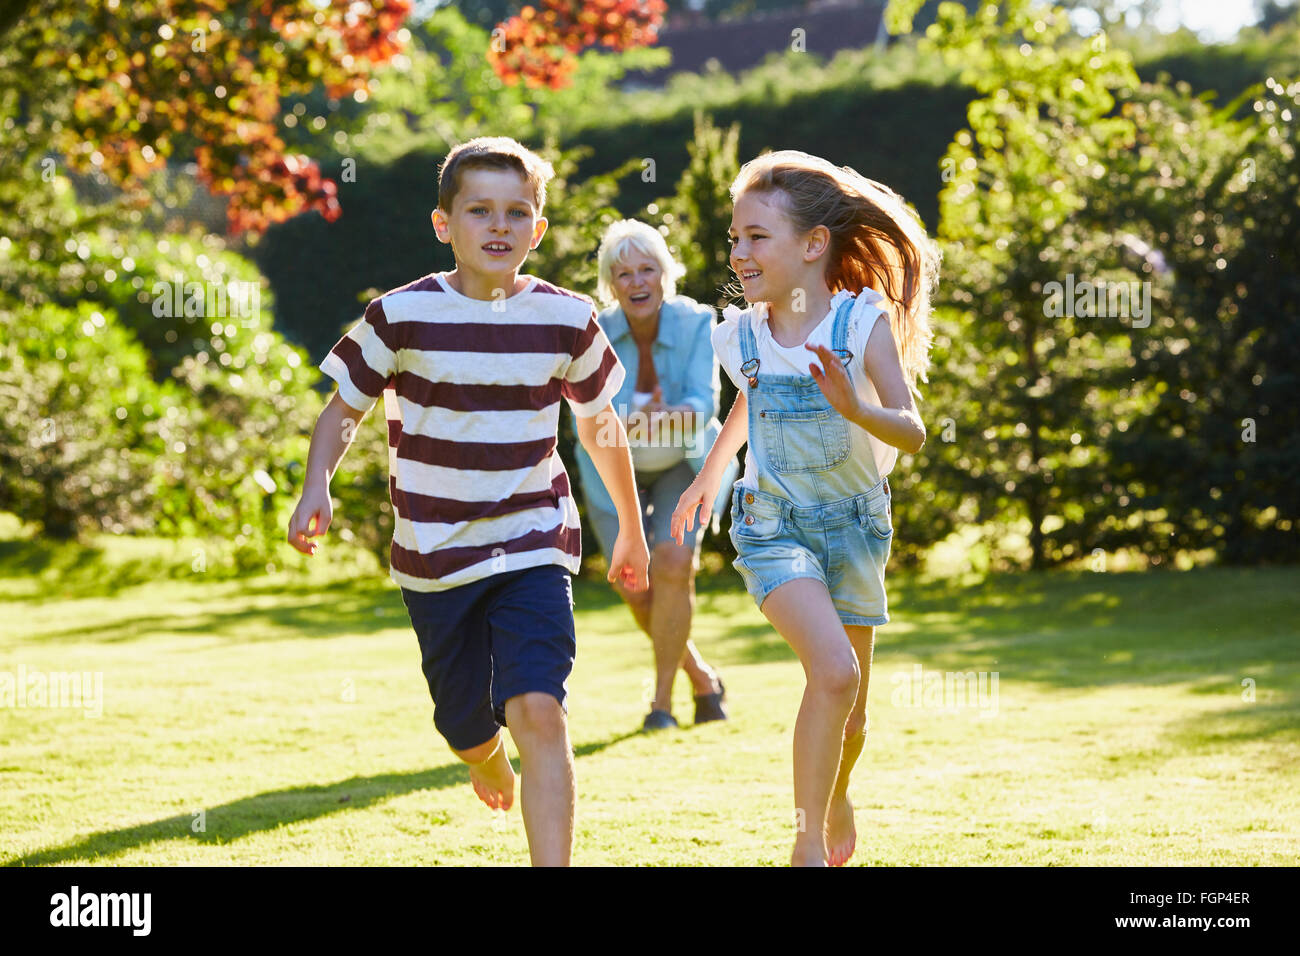 Brother and sister running in sunny garden Stock Photo